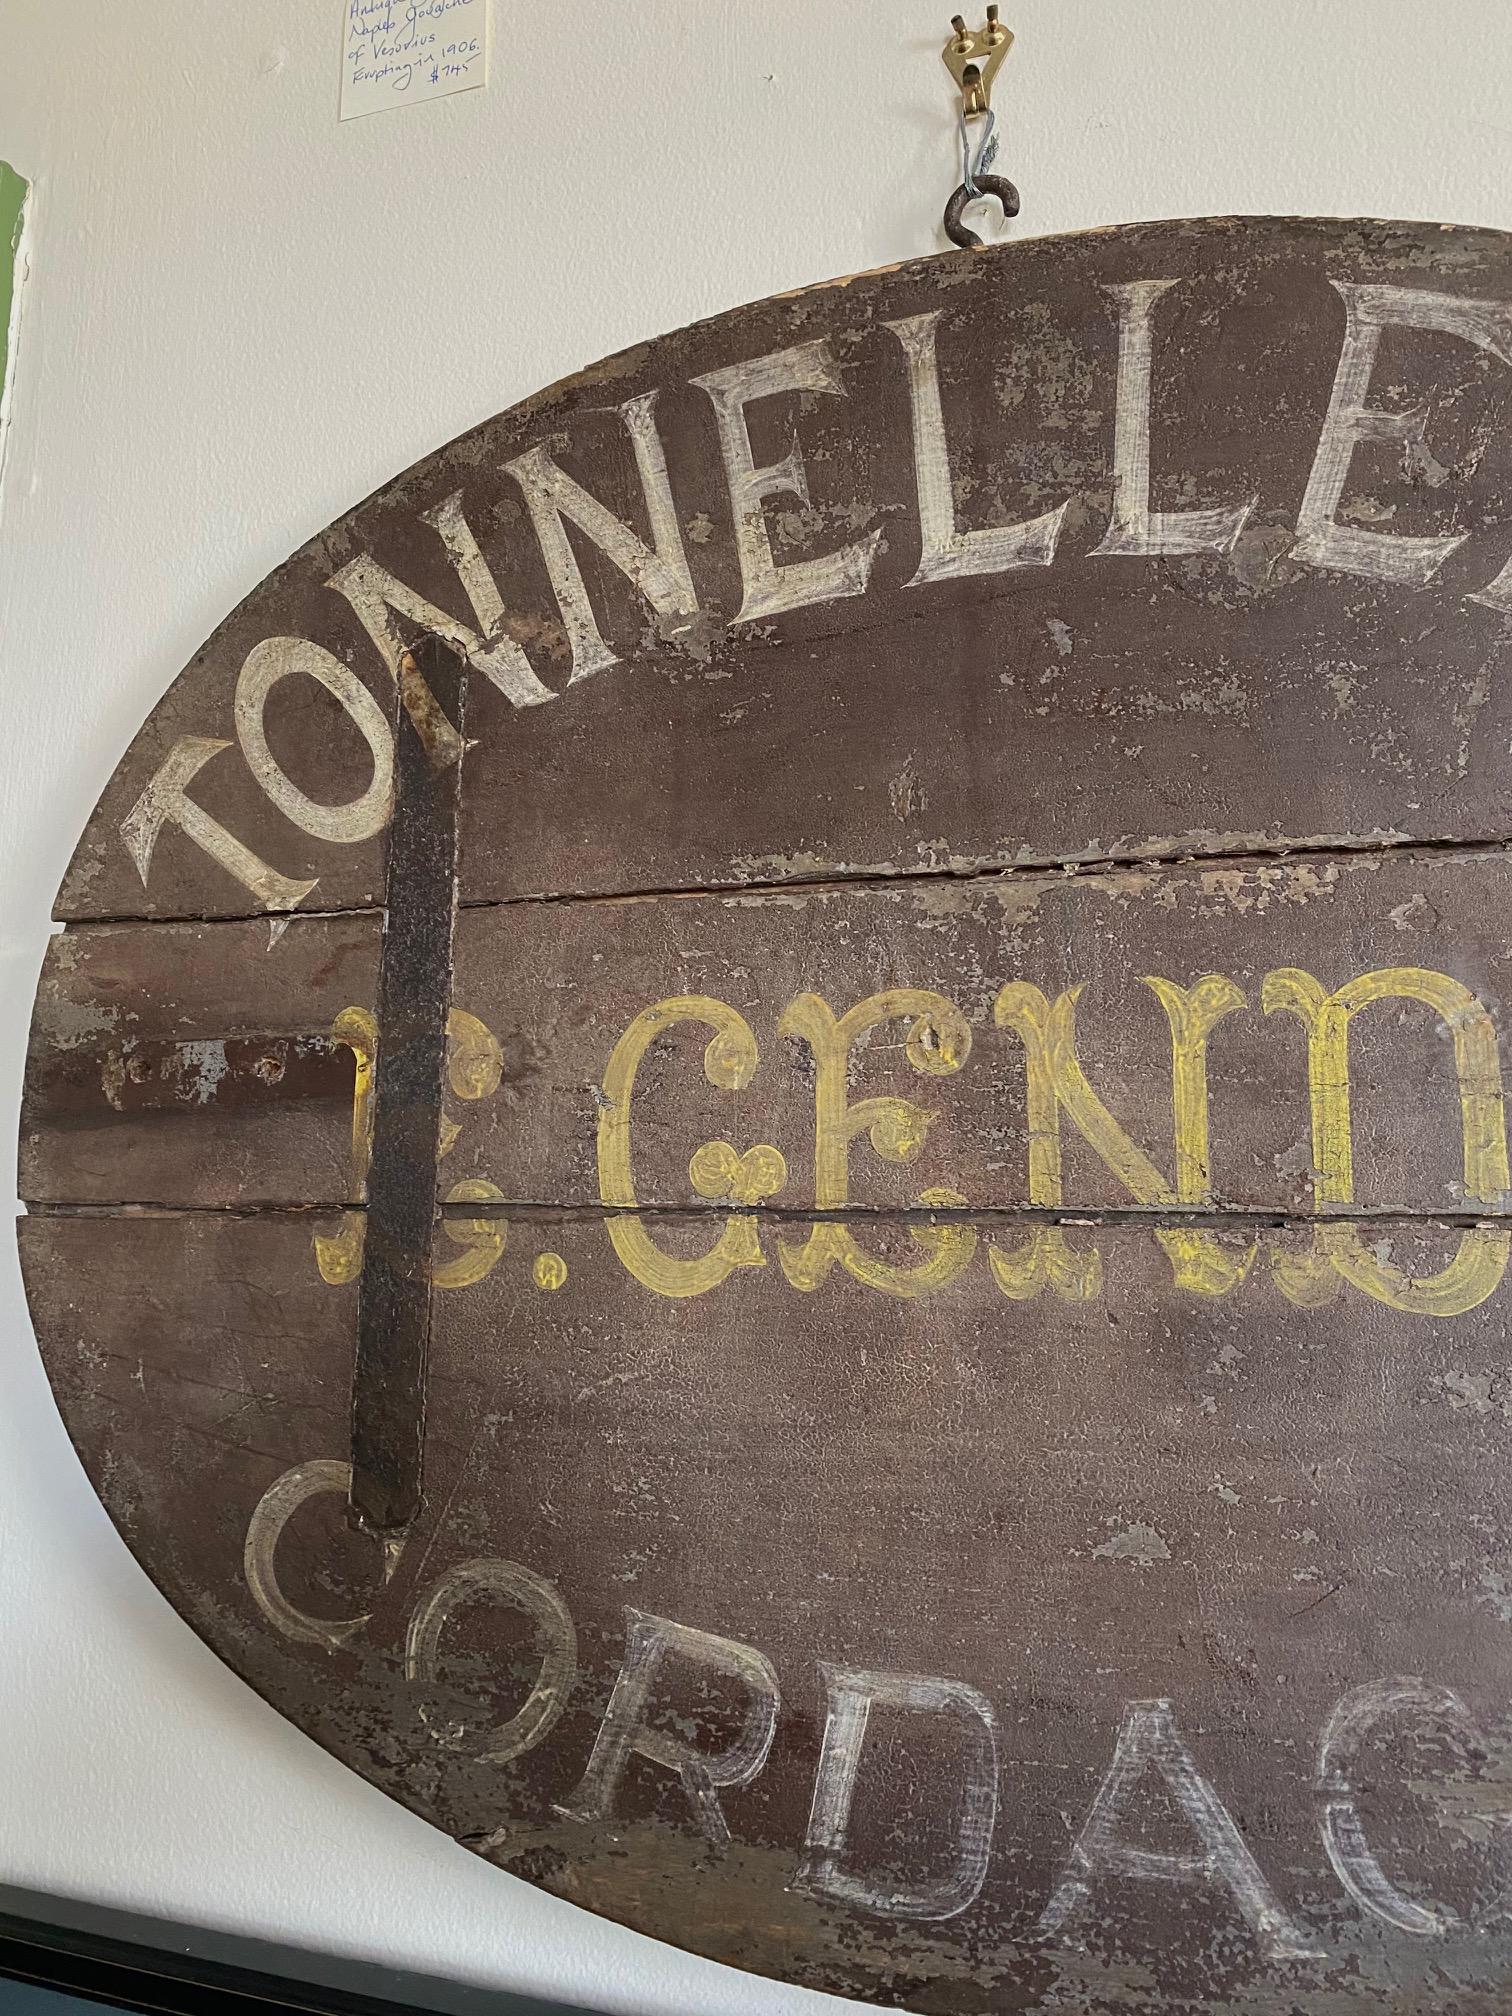 18th or 19th century French ship chandler's trade sign, circa 1800, an oval pine double sided sign built with large dove-tails, advertising Cooperage and Cordage. A very rare sign that was most likely catering to the whaling trade (what other ships